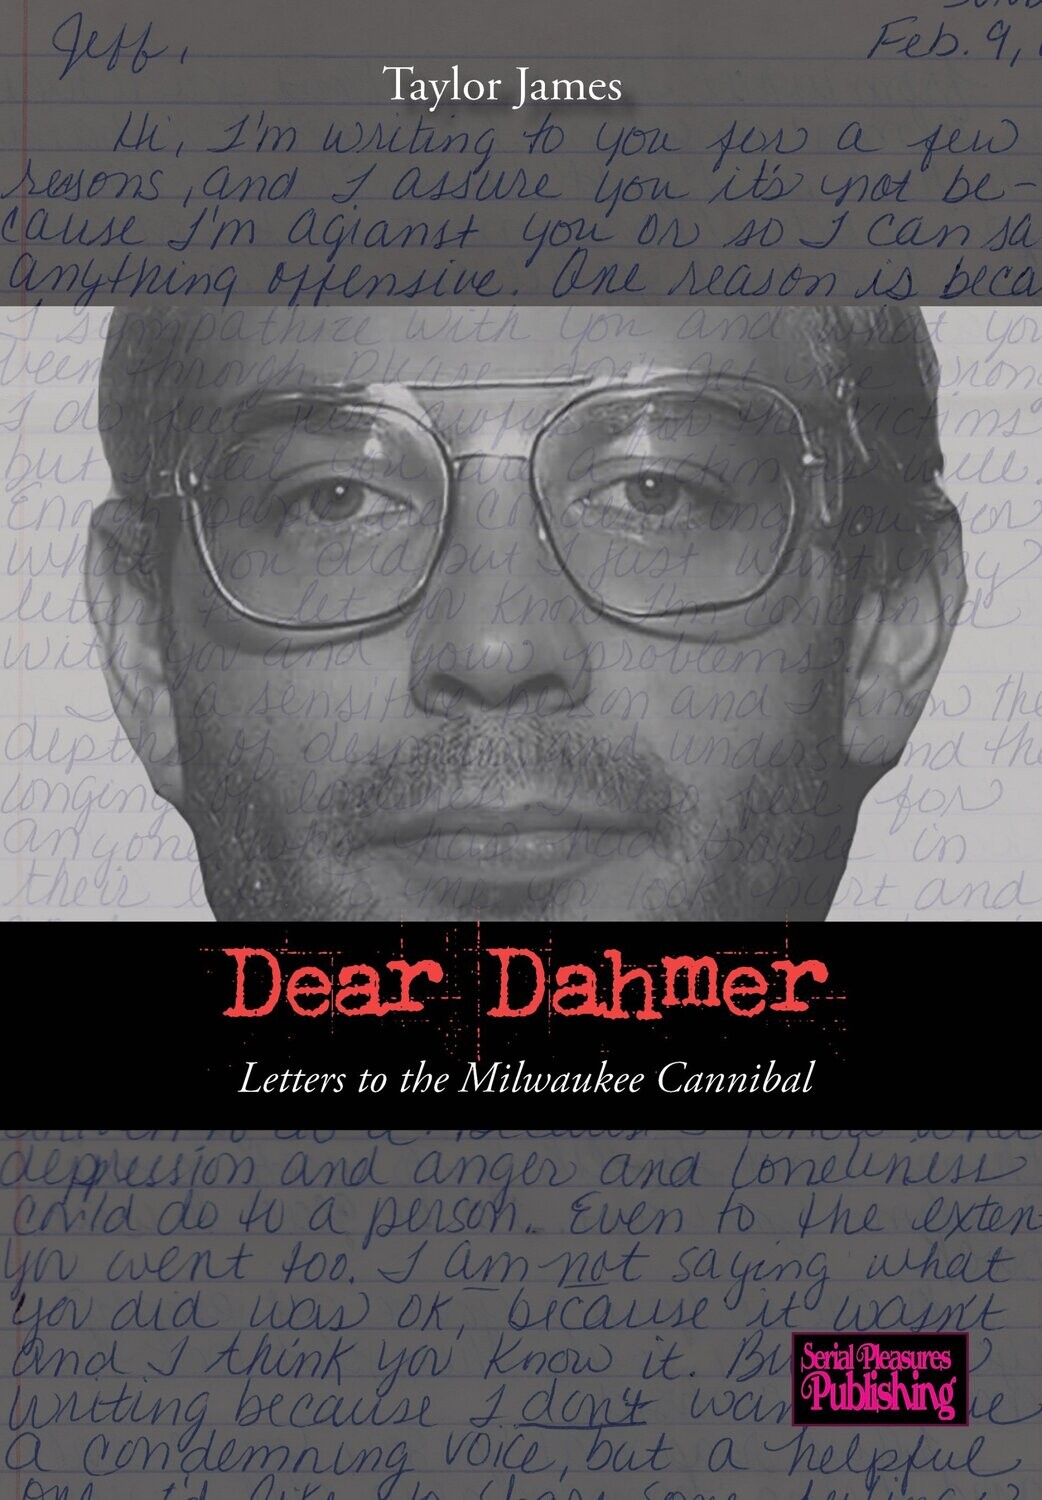 Dear Dahmer - Letters to the Milwaukee Cannibal